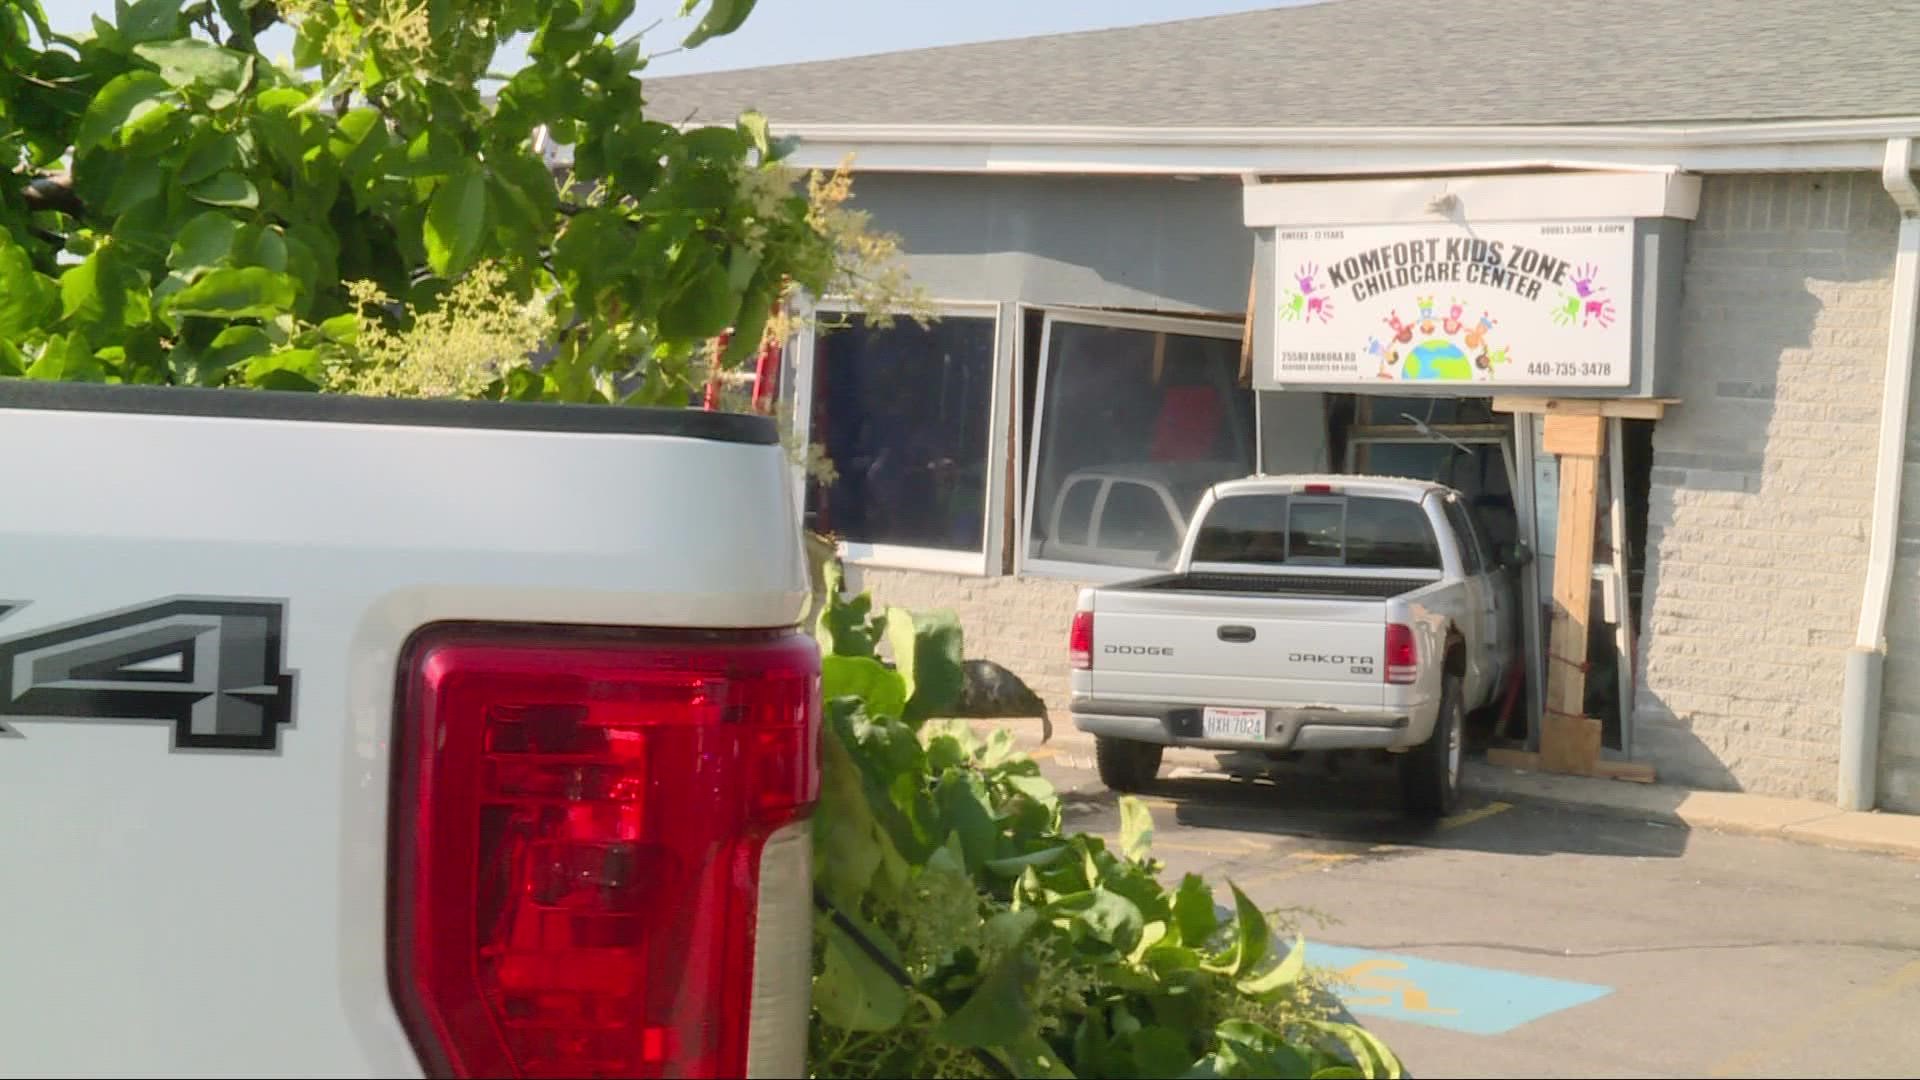 Authorities are investigating after a pickup truck crashed through the front of a child care center in Bedford Heights on Wednesday morning.